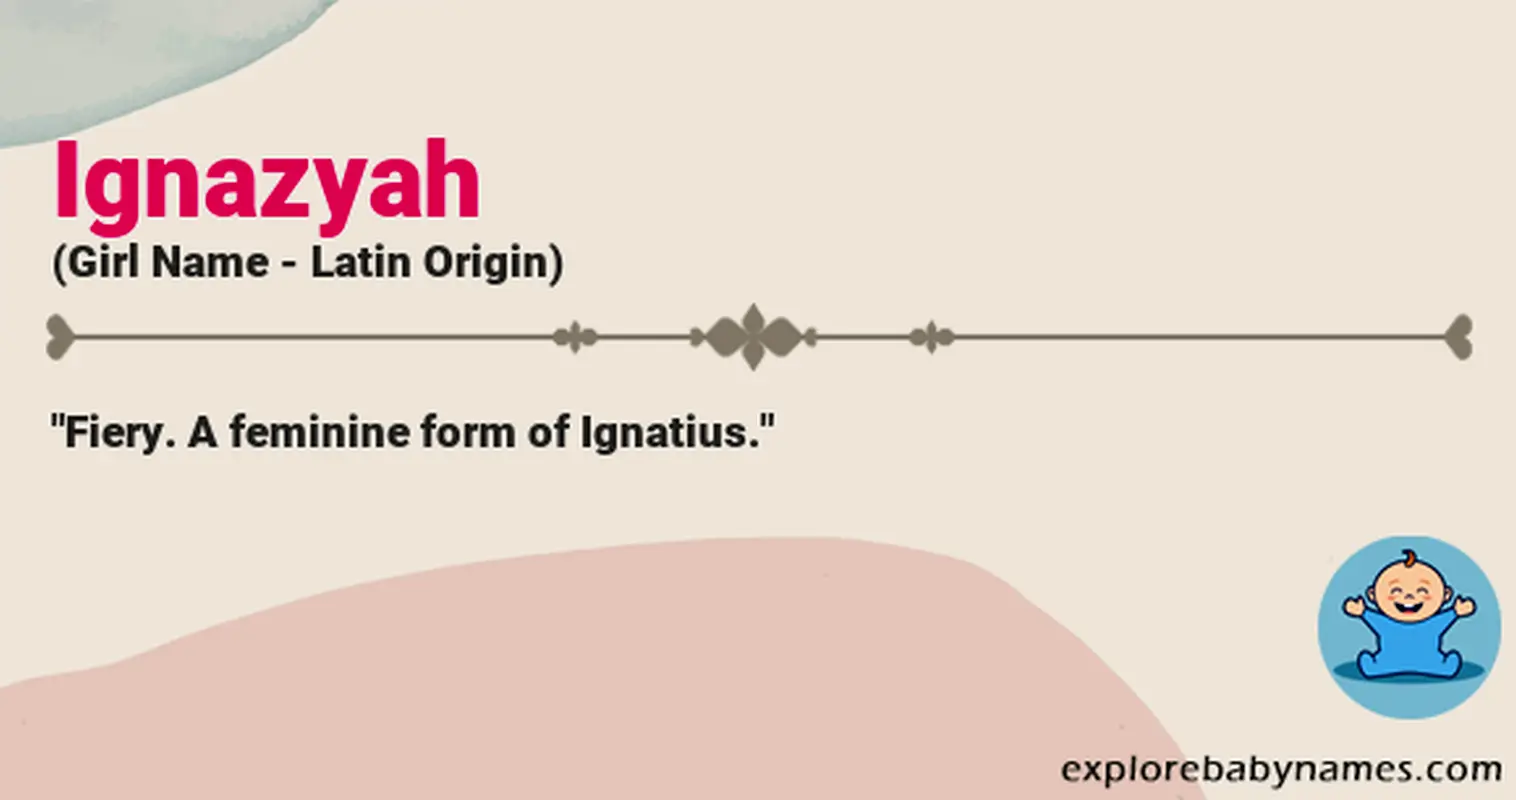 Meaning of Ignazyah